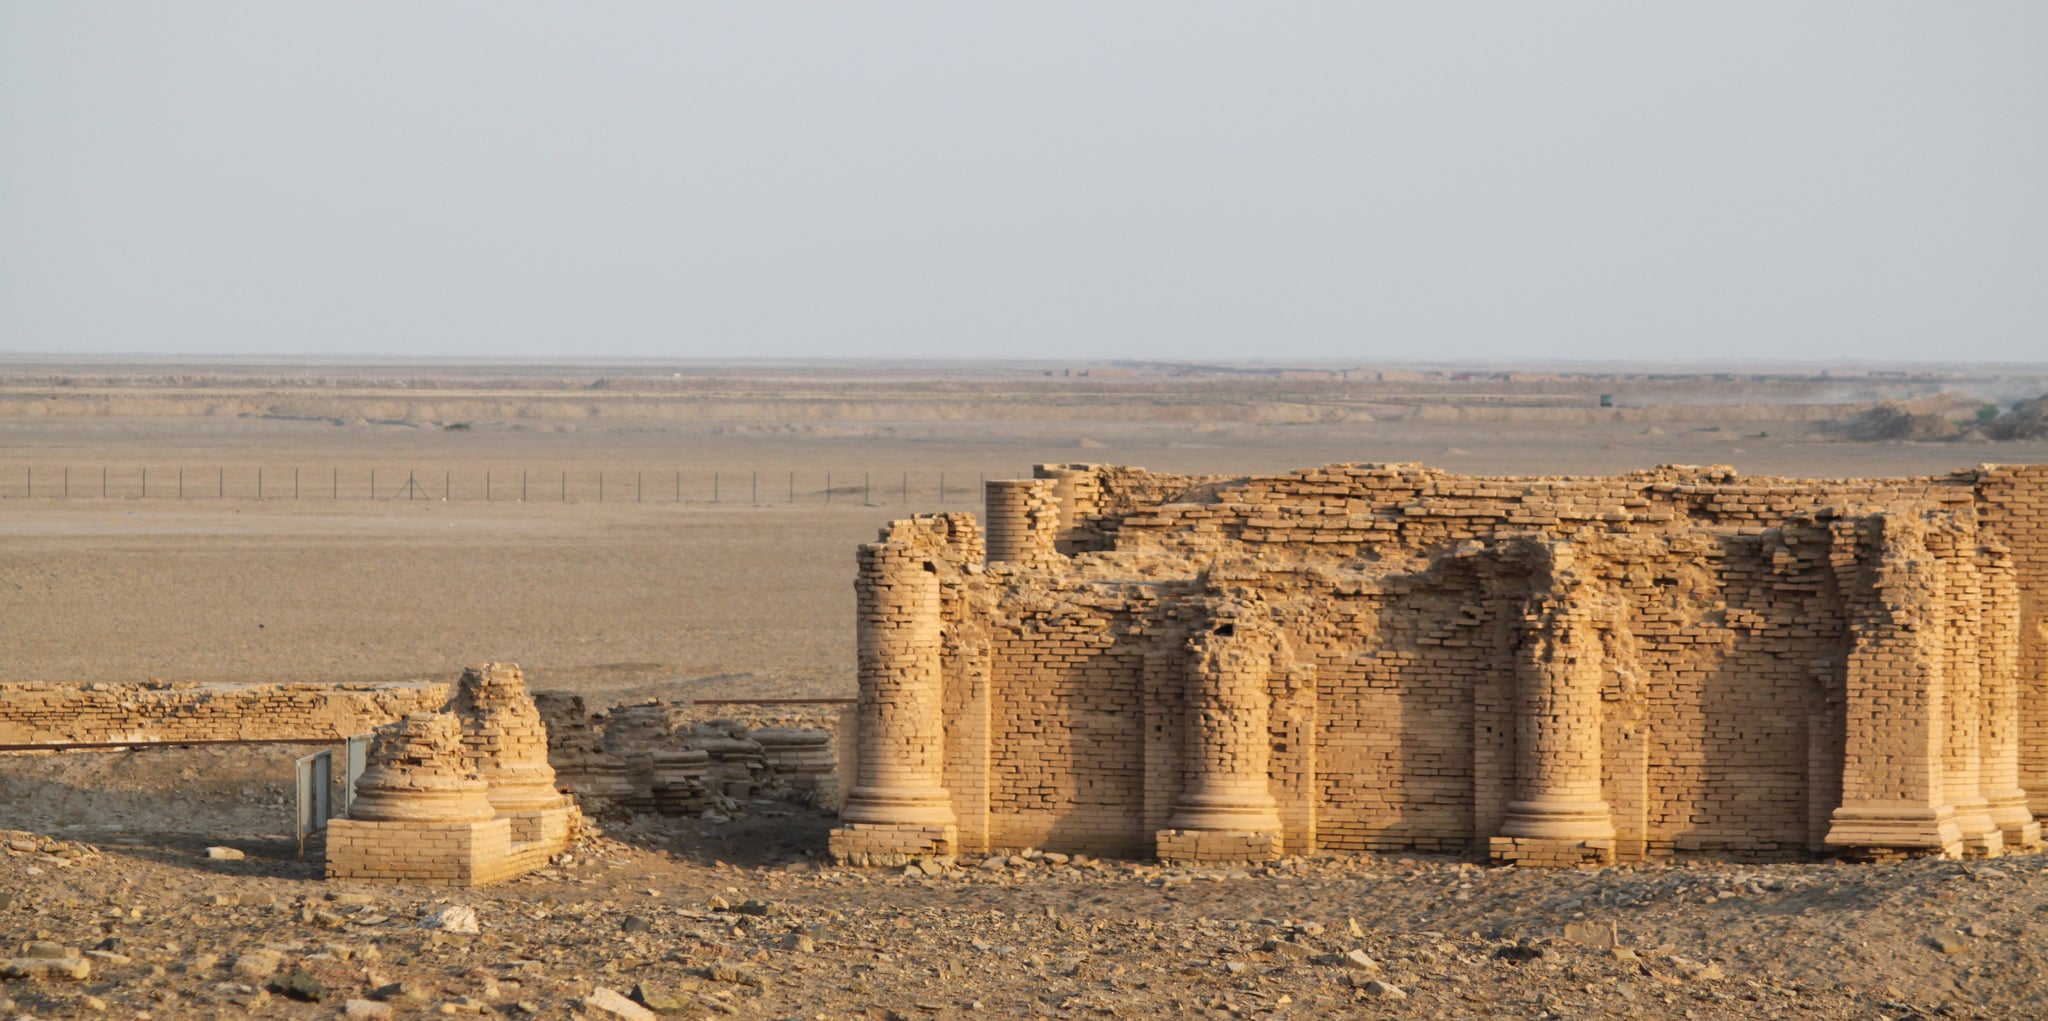 A Parthian temple in the ancient city of Uruk in modern day Iraq